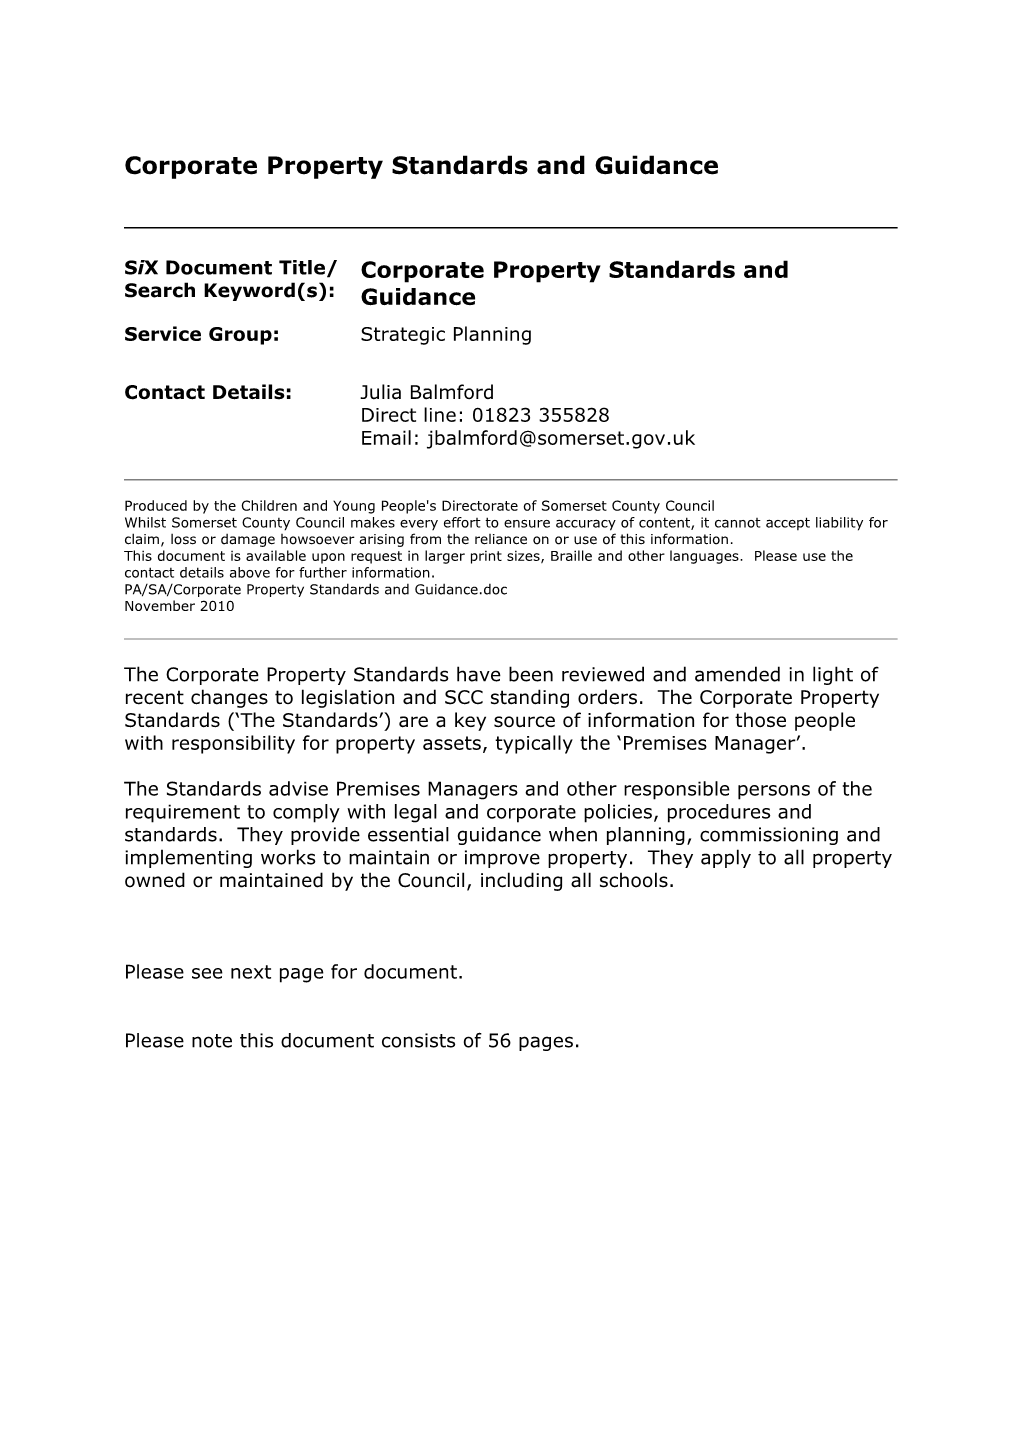 Corporate Property Standards and Guidance(2016-09-02 3-52-25 34445)